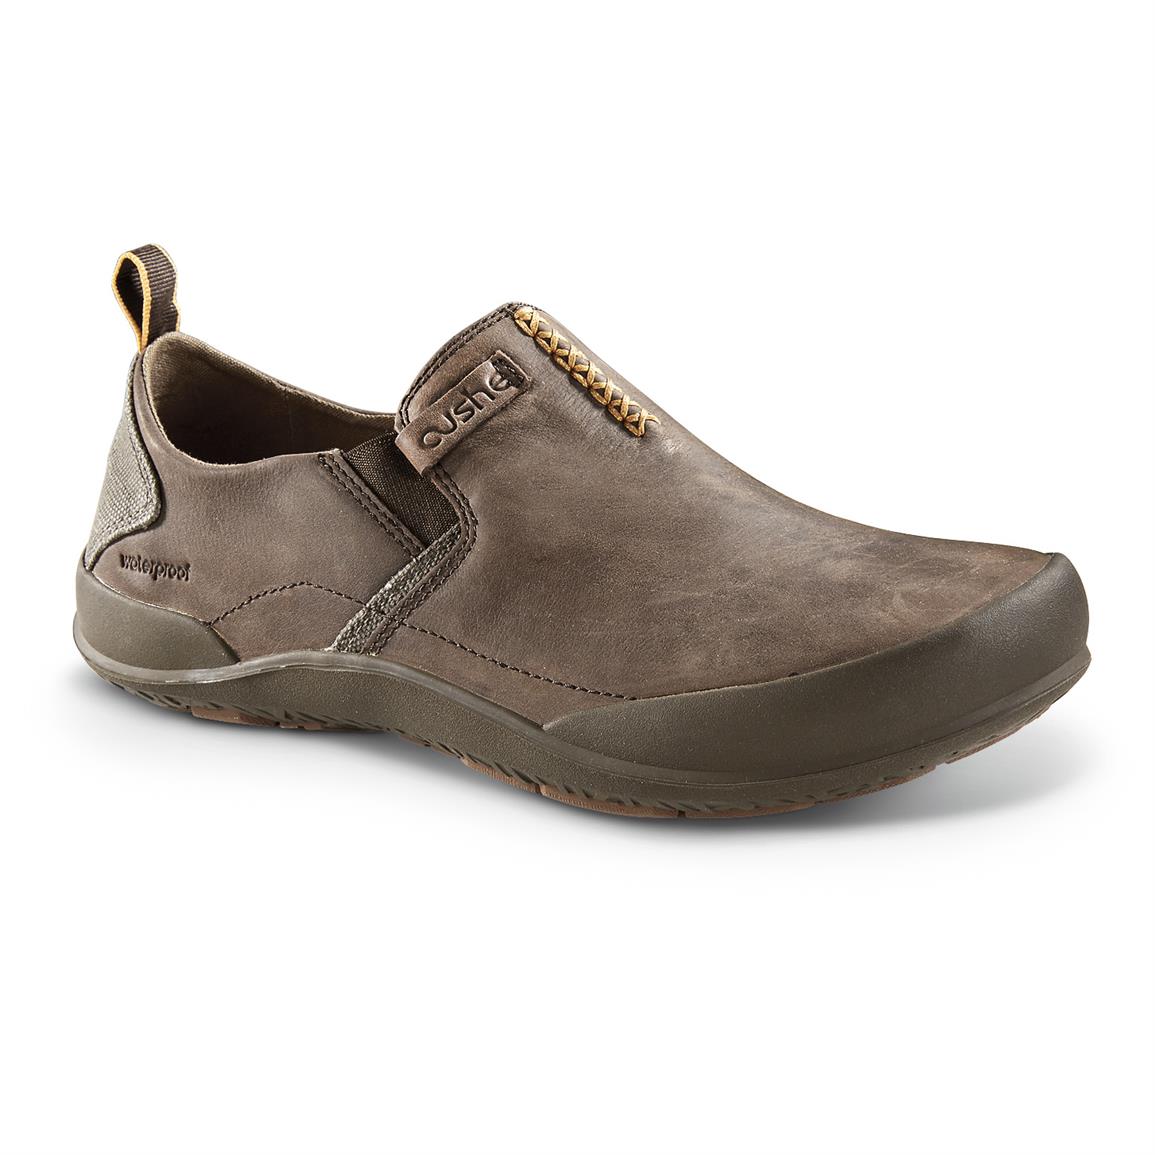 Cushe Swell Shoes - 643359, Casual Shoes at Sportsman's Guide